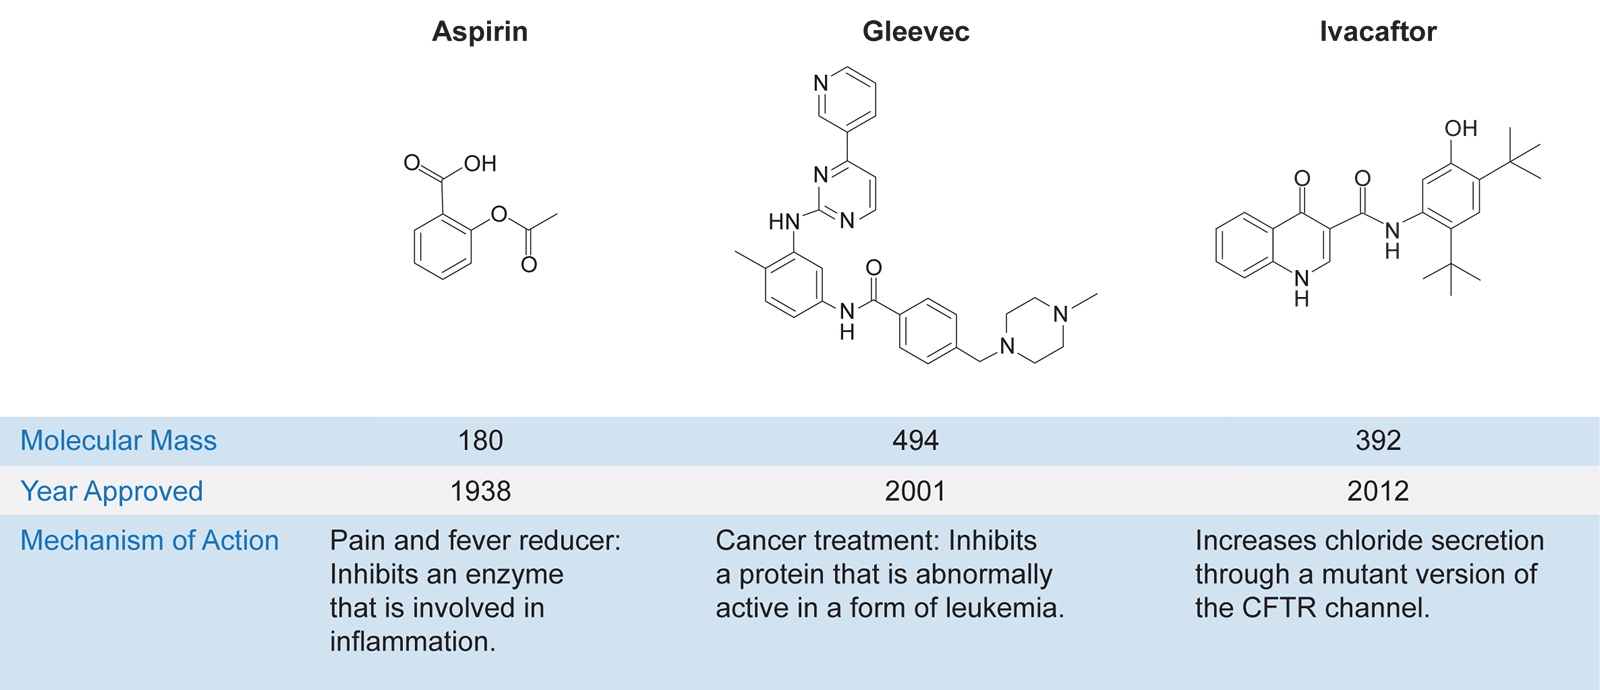 Three diagrams show the molecular structure of aspirin, Gleevec, and ivacaftor. A table below the three structures gives the molecular mass, year approved, and mechanism of action for each drug. Aspirin has a molecular mass of 180, was approved in 1938, and is a pain and fever reducer: it inhibits an enzyme that is involved in inflammation. Gleevec has a molecular mass of 494, was approved in 2001, and is a cancer treatment: it inhibits a protein that is abnormally active in a form of leukemia. Ivacaftor has a molecular mass of 392, was approved in 2012, and increases chloride secretion through a mutant version of the C-F-T-R channel.